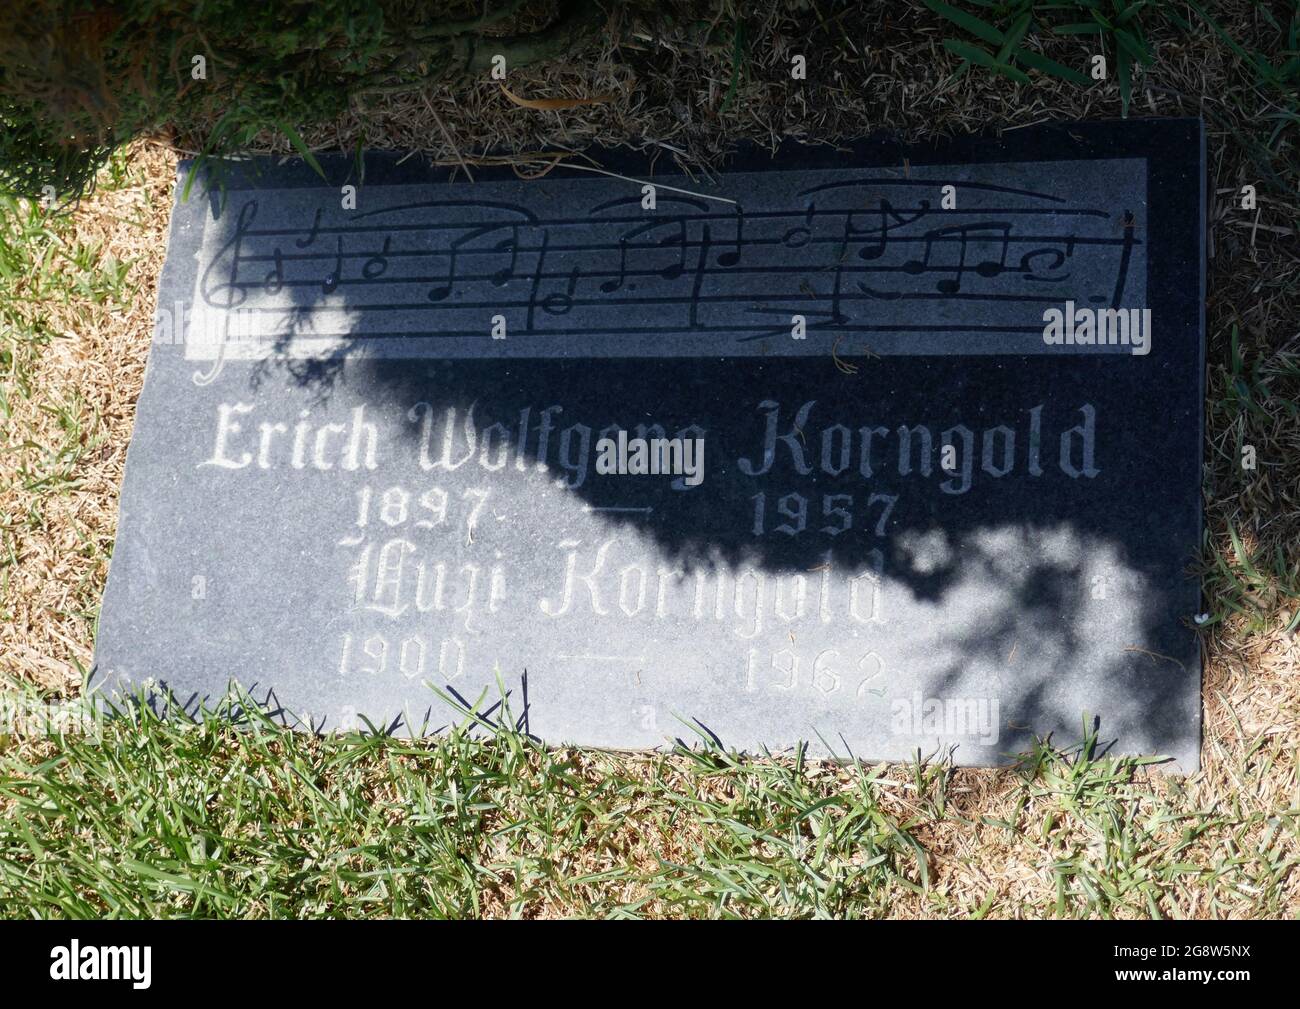 Los Angeles, California, USA 20th July 2021 A general view of atmosphere of composer Erich Wolfgang Korngold's grave at Hollywood Forever Cemetery on July 20, 2021 in Los Angeles, California, USA. Photo by Barry King/Alamy Stock Photo Stock Photo